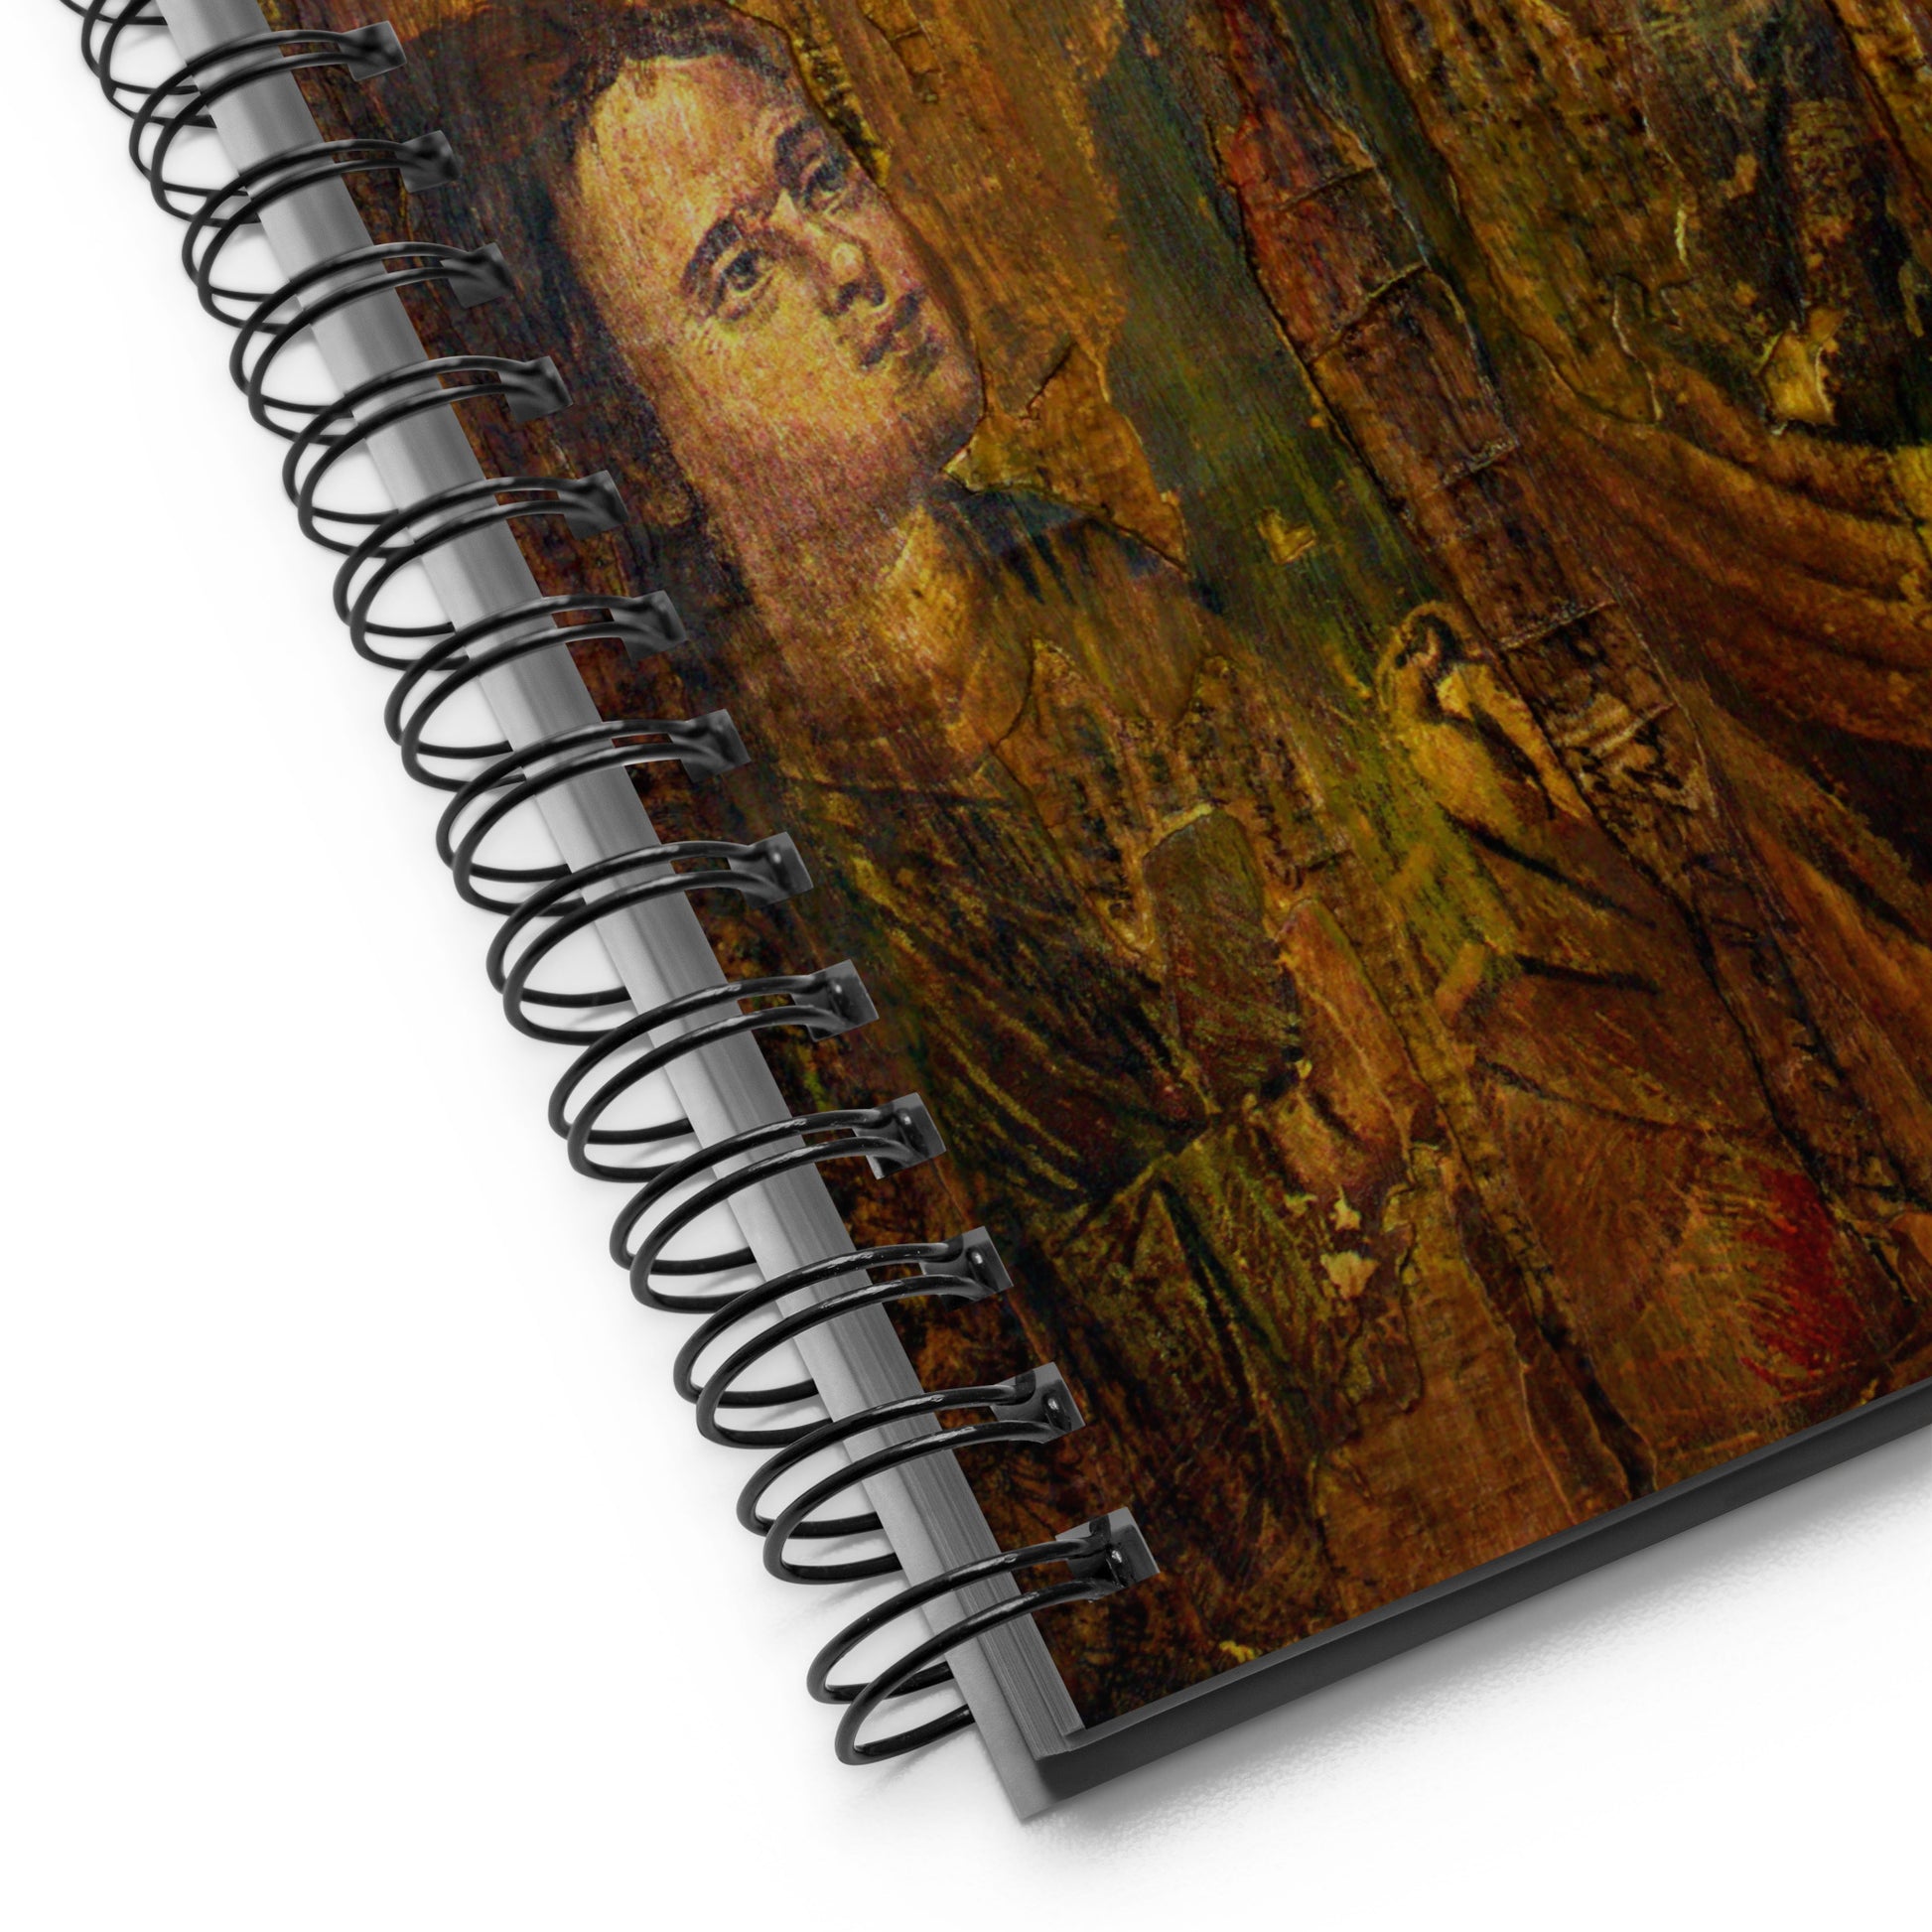 Mother of God Spiral Notebook - Dotted Paper - Studio Lams Creative Collective